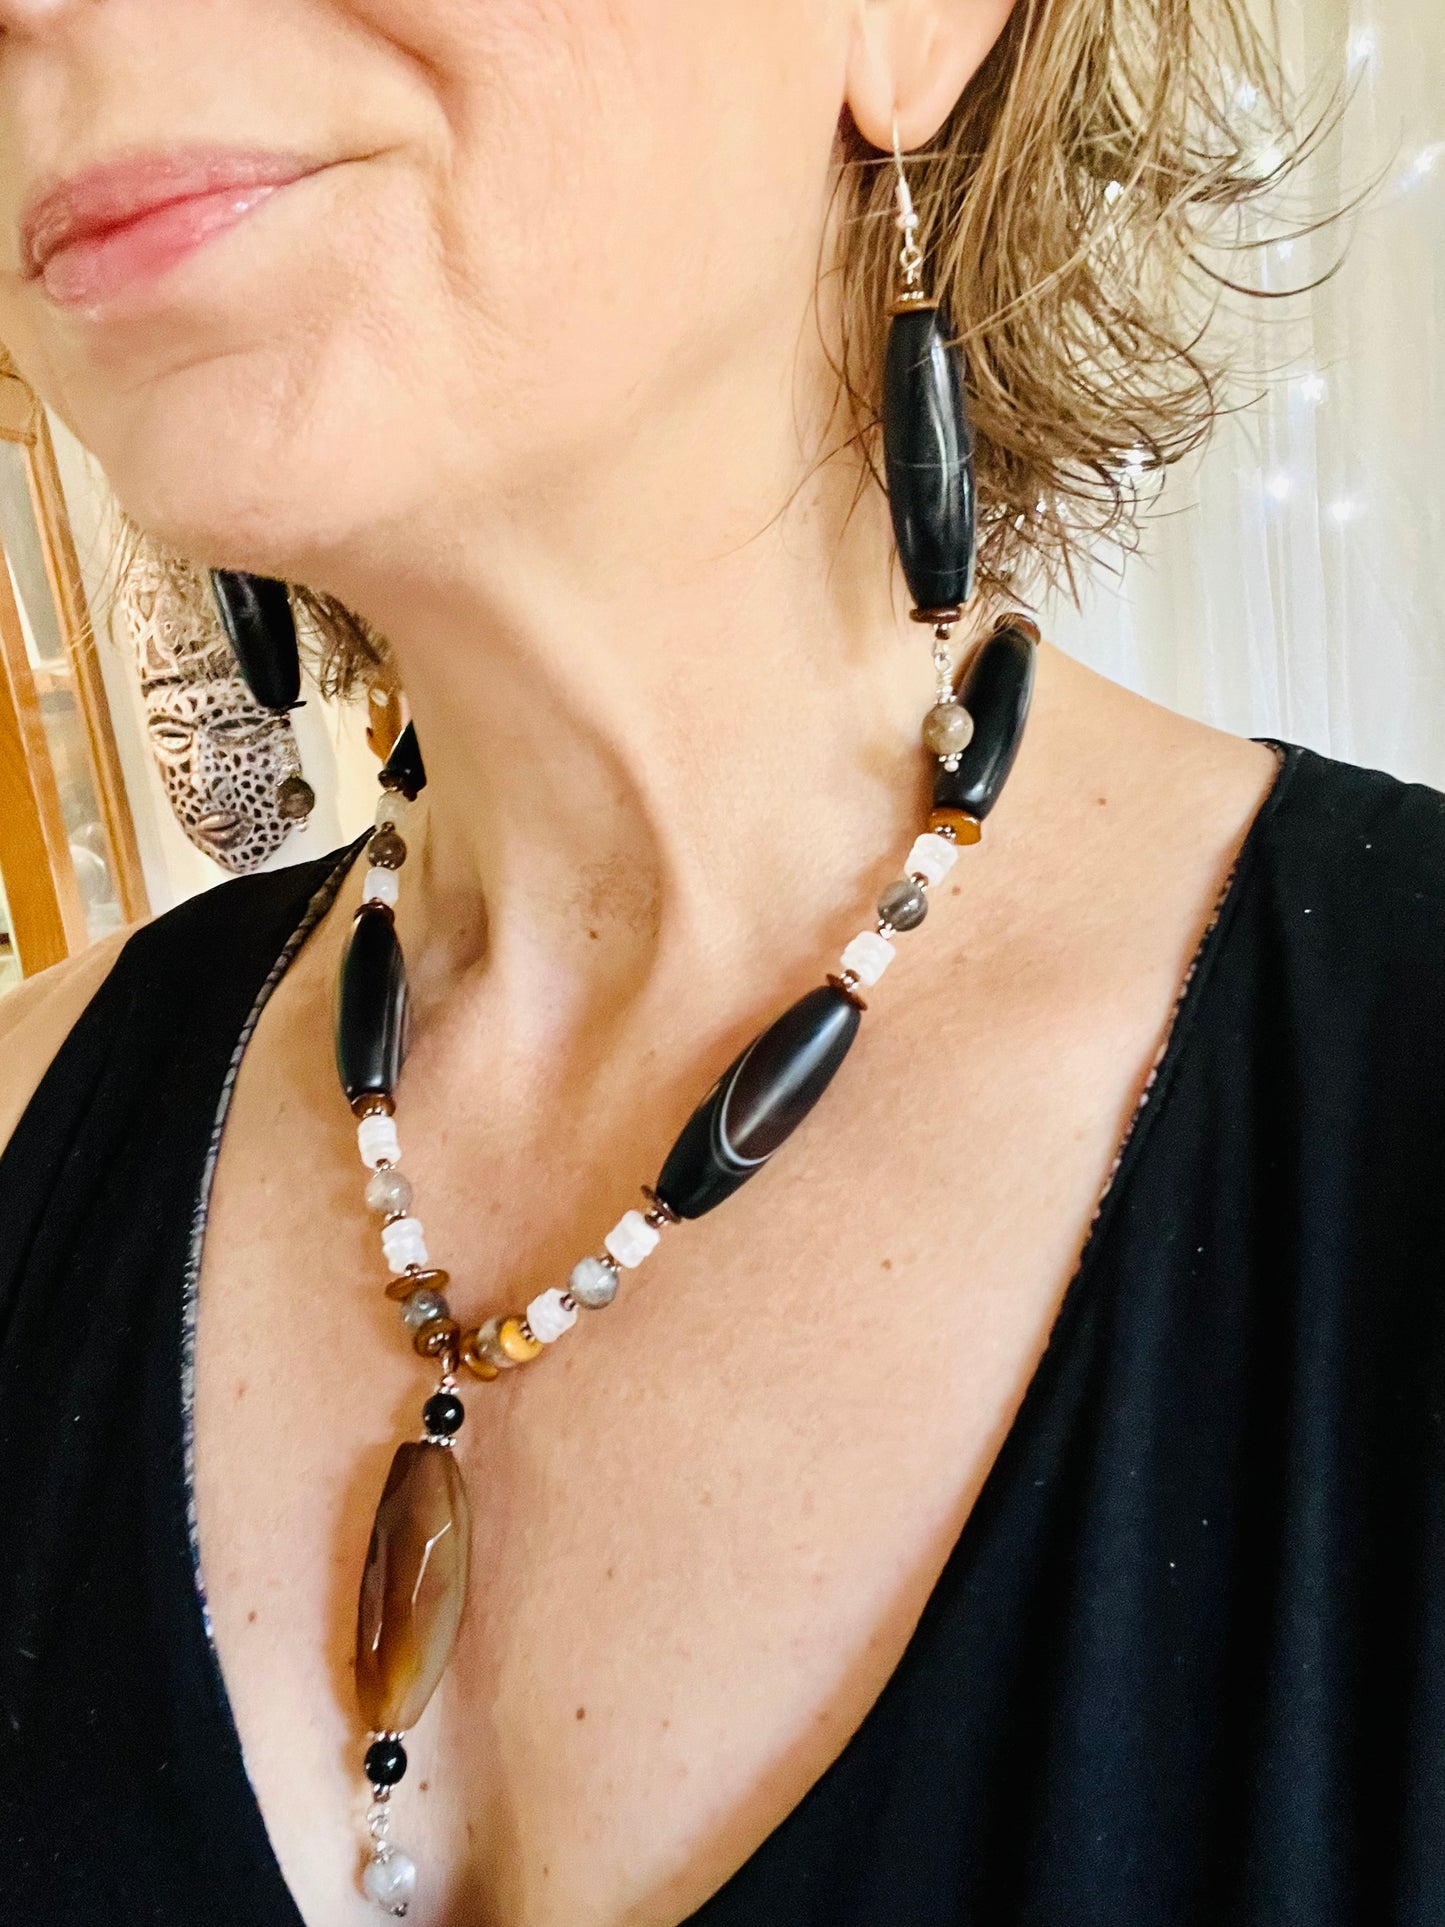 Black Agate Necklace and Earrings